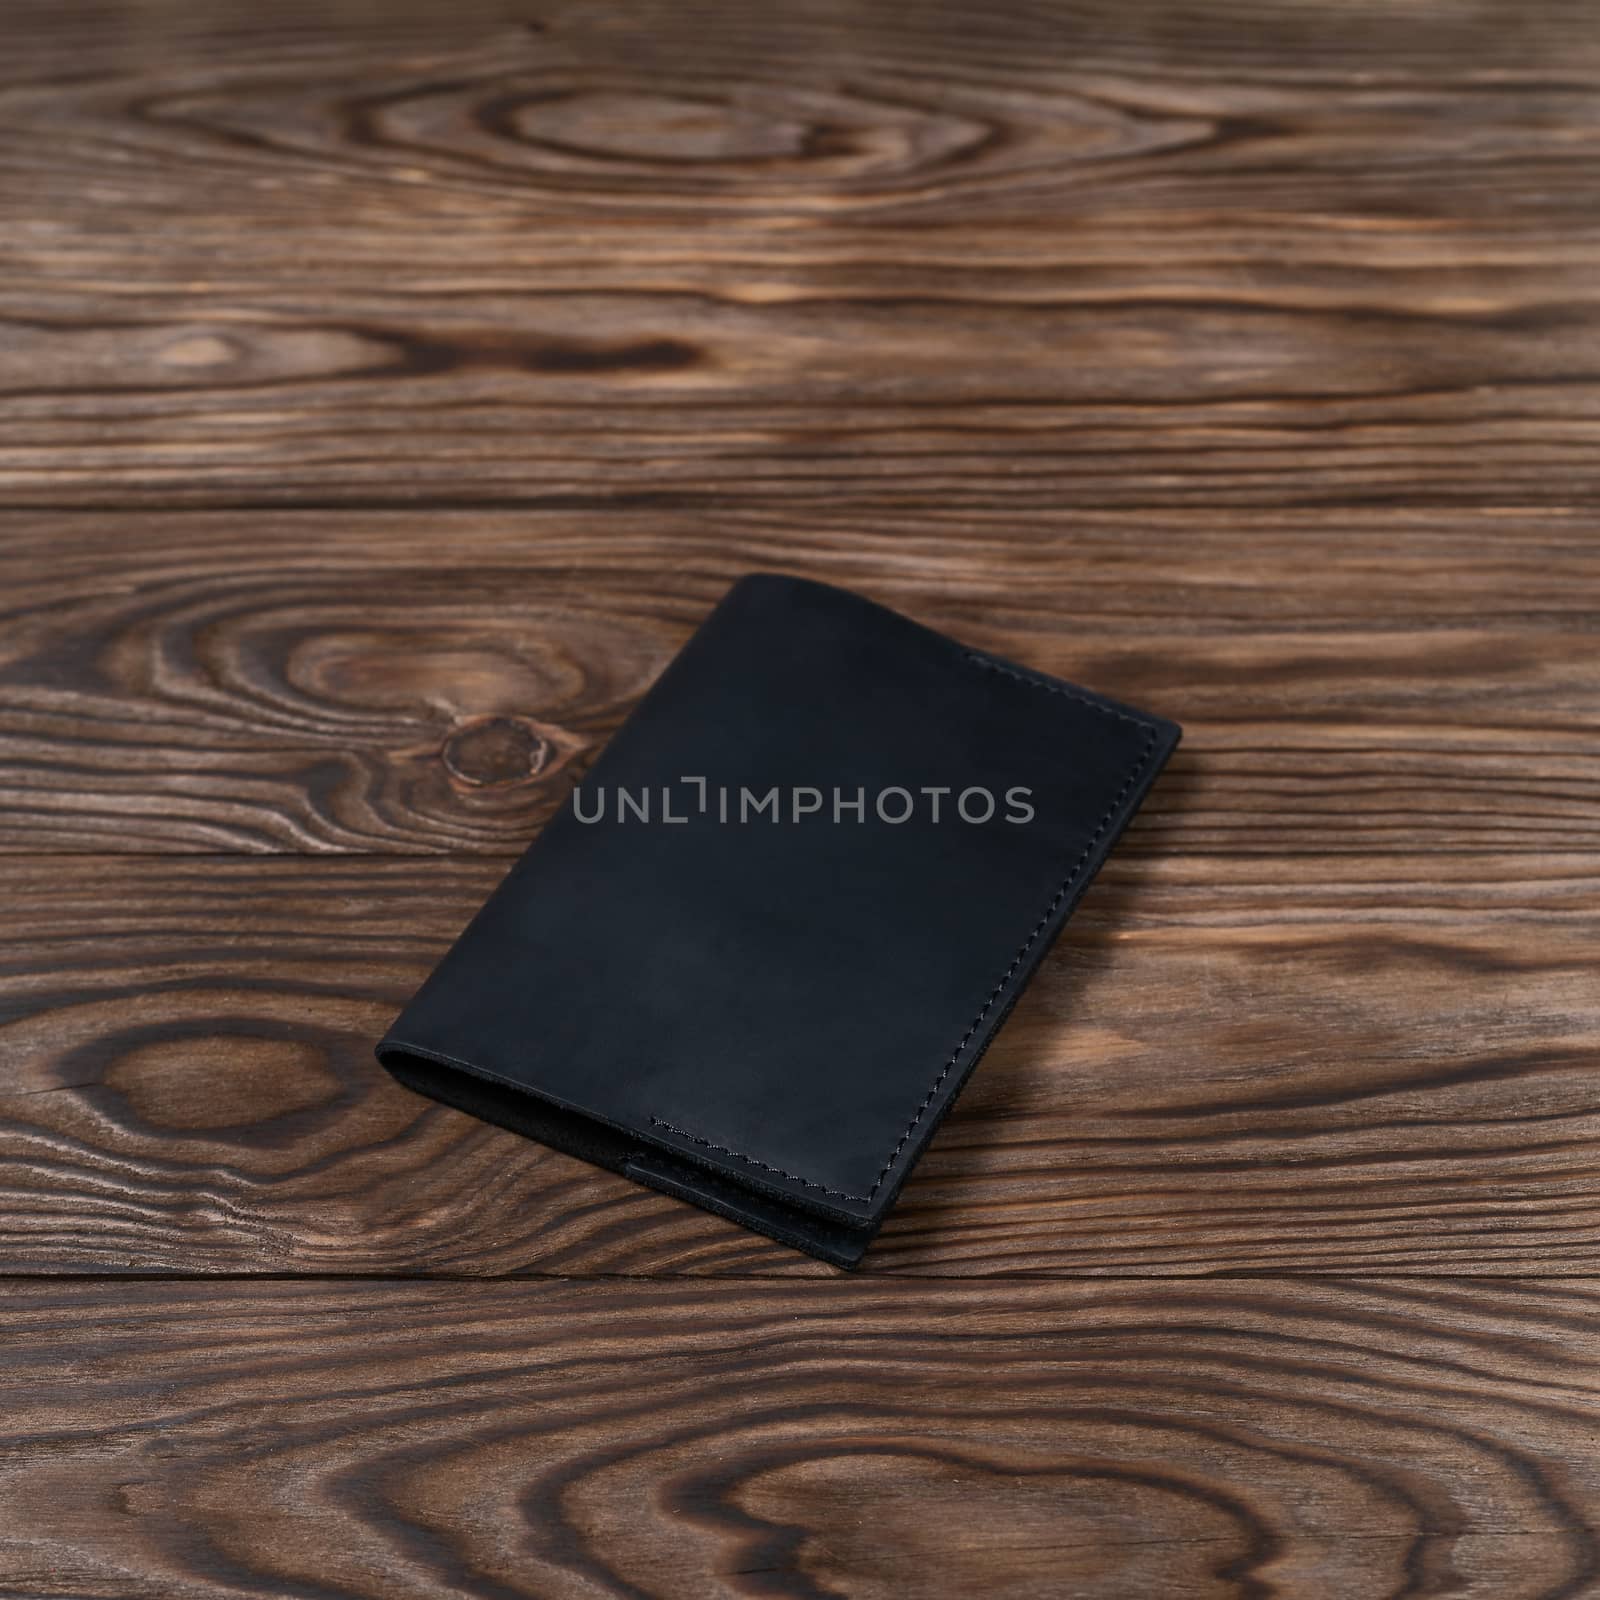 Black color handmade leather passport cover on wooden textured background. Businessman`s accessory.